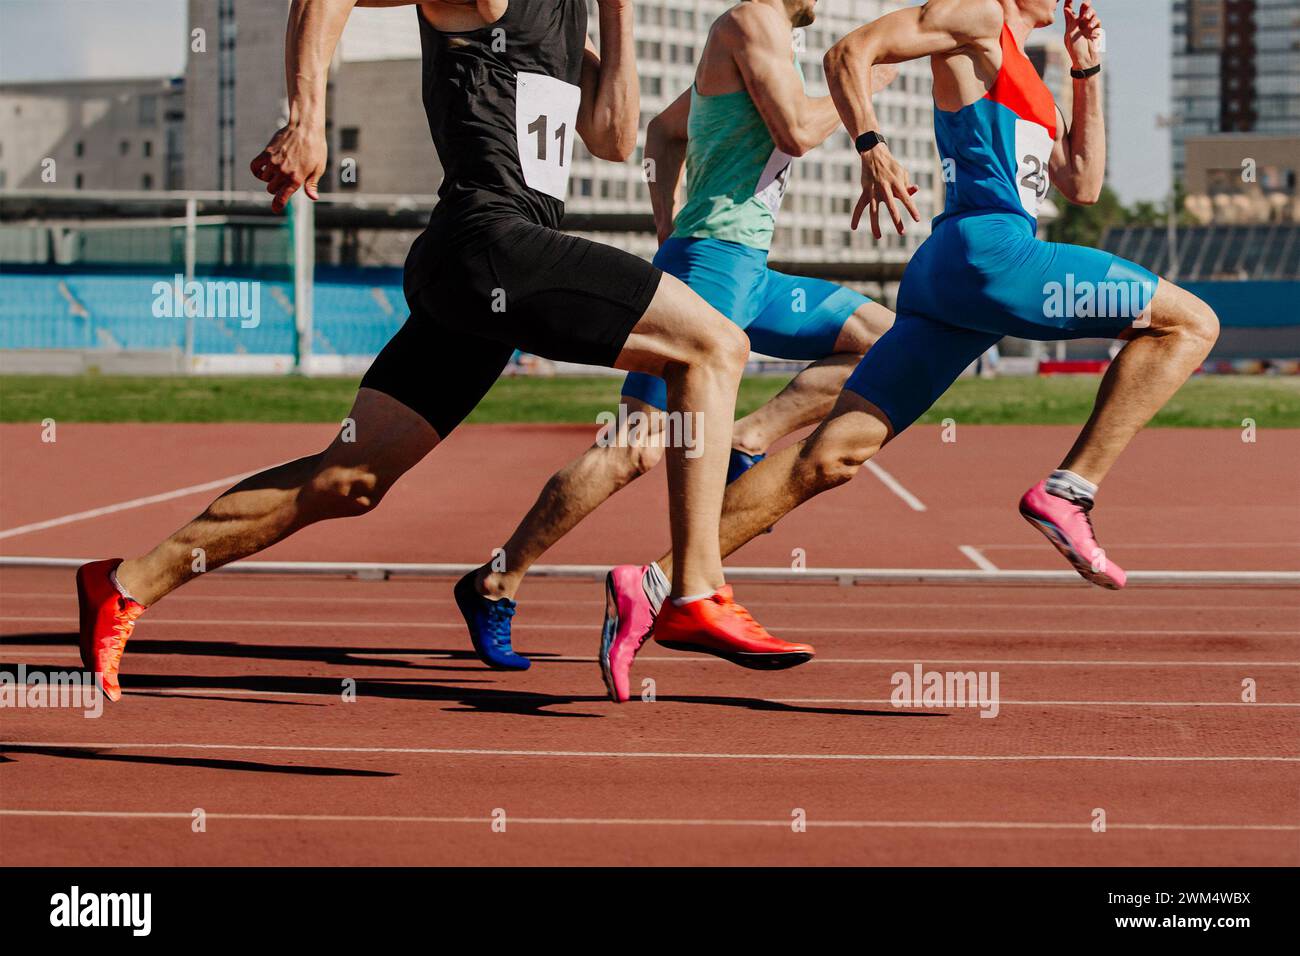 group male athletes sprinting on red track stadium, muscles taut, competing fiercely. summer sports games Stock Photo